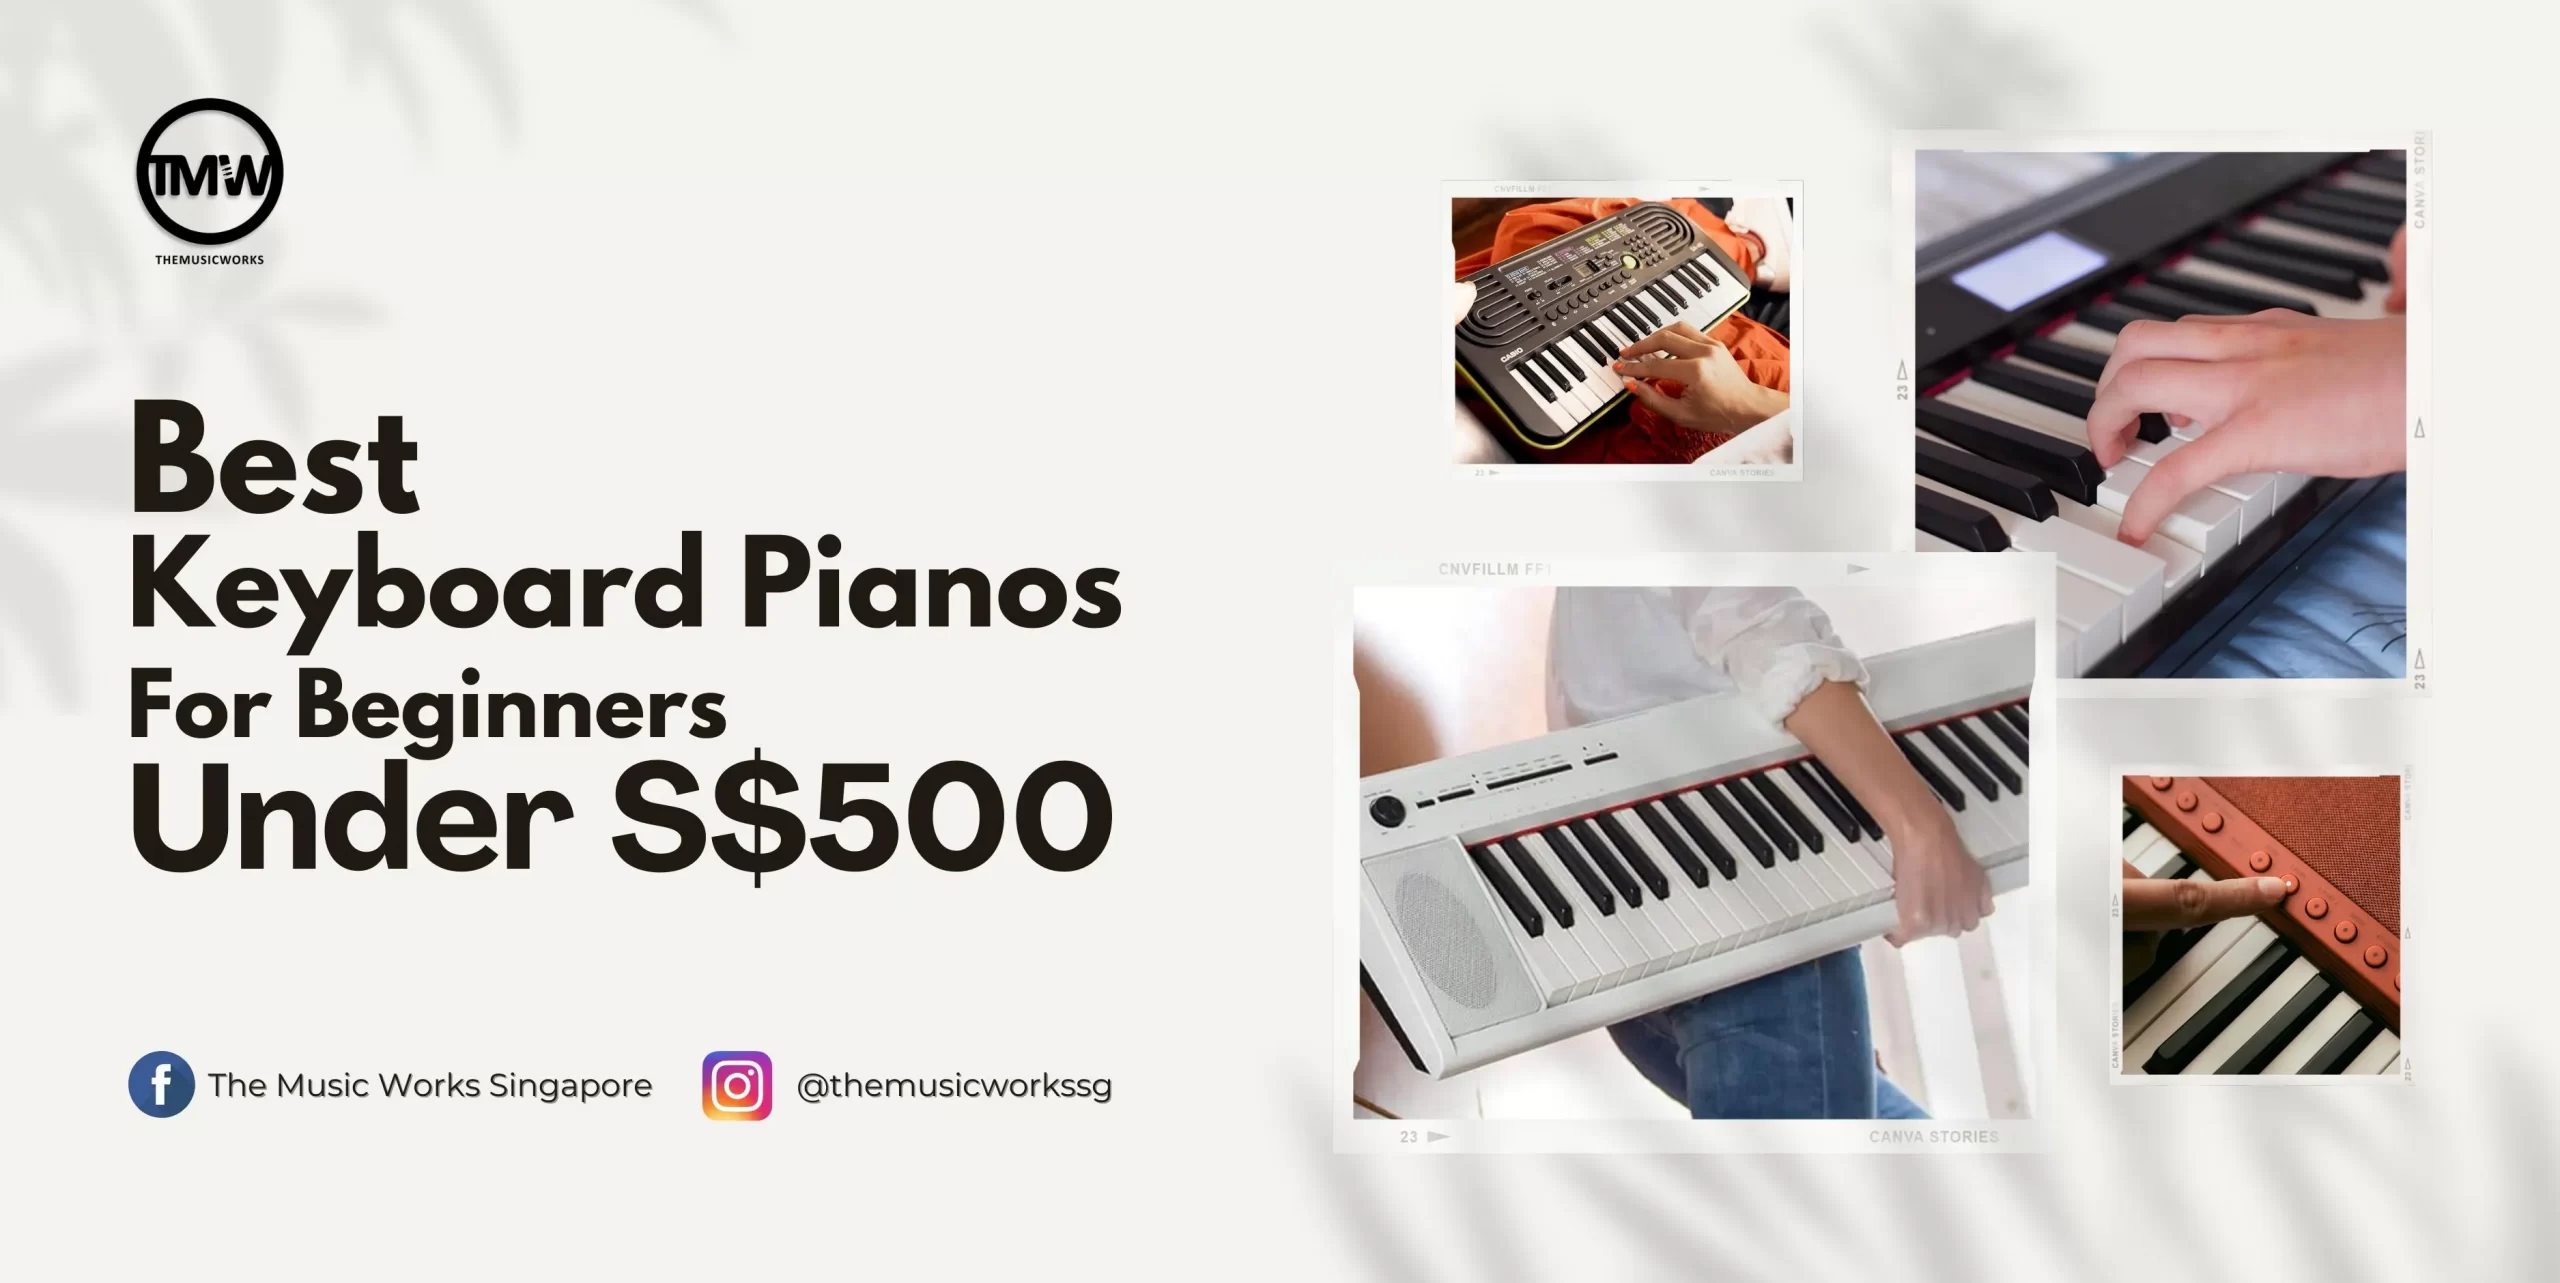 Top 5 Best Keyboard Pianos for Beginners Under $500 in August 2022 (Updated)